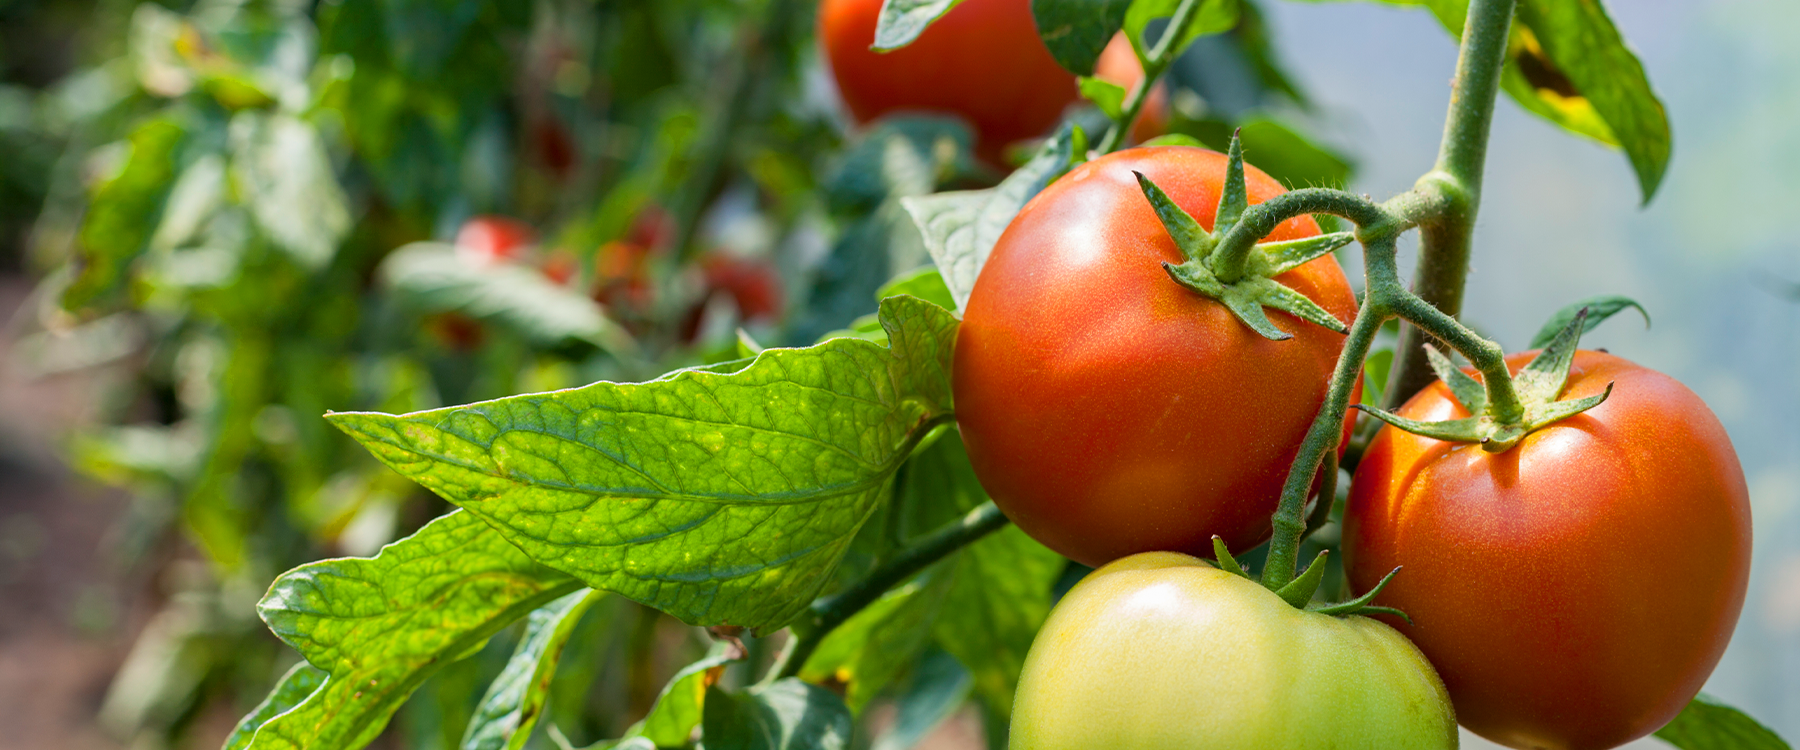 How To Prune Tomatoes for Maximum Yield